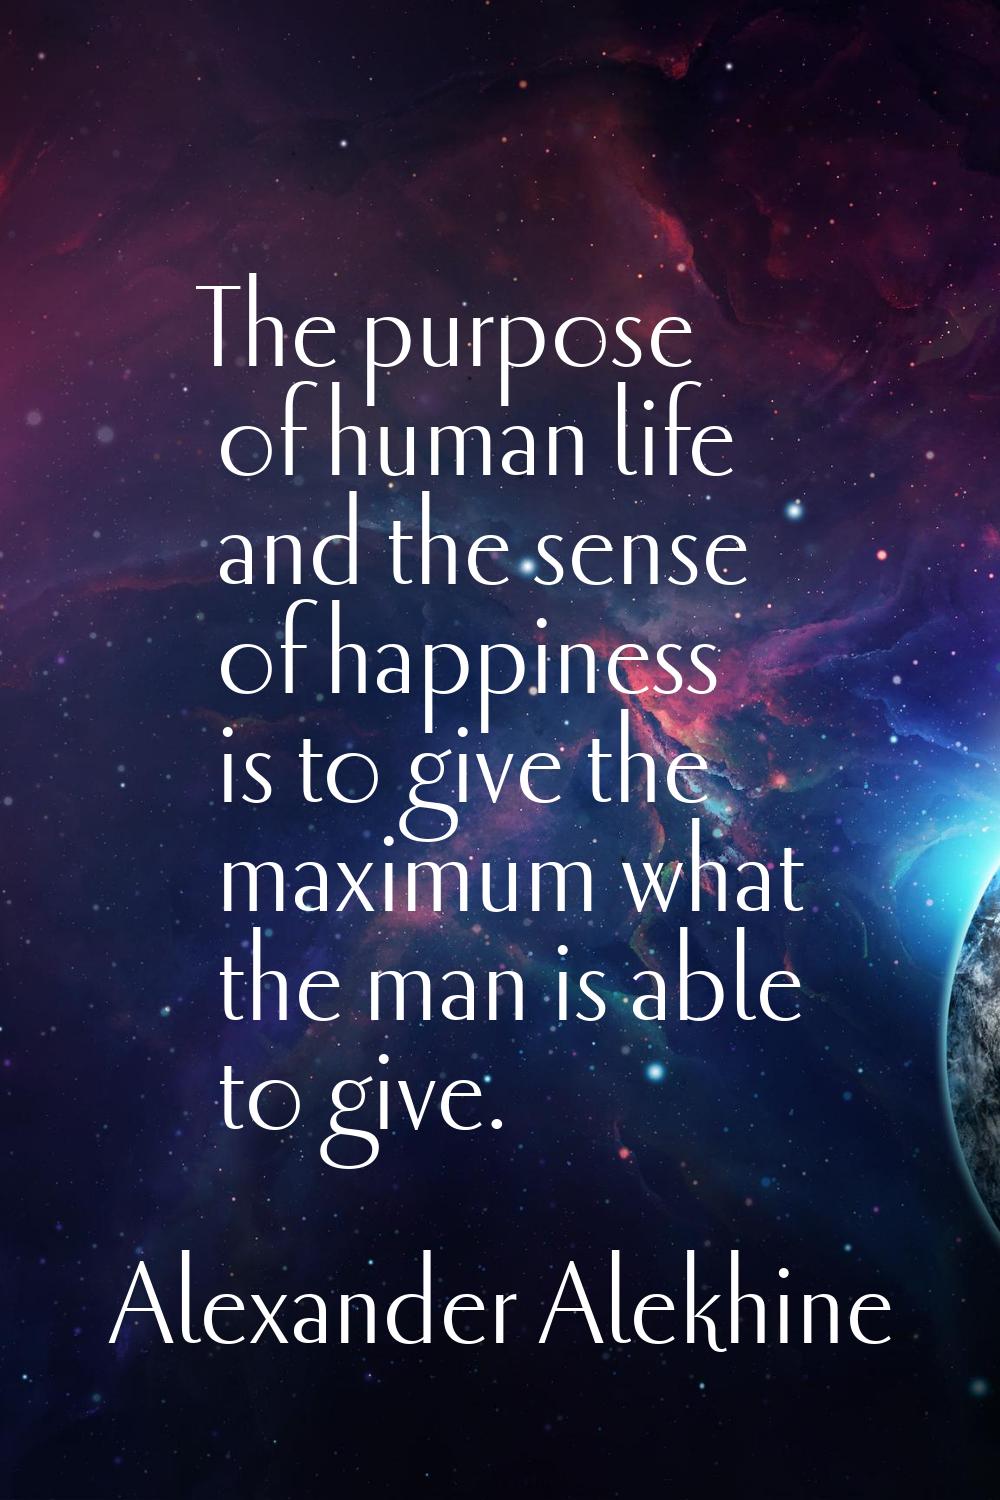 The purpose of human life and the sense of happiness is to give the maximum what the man is able to